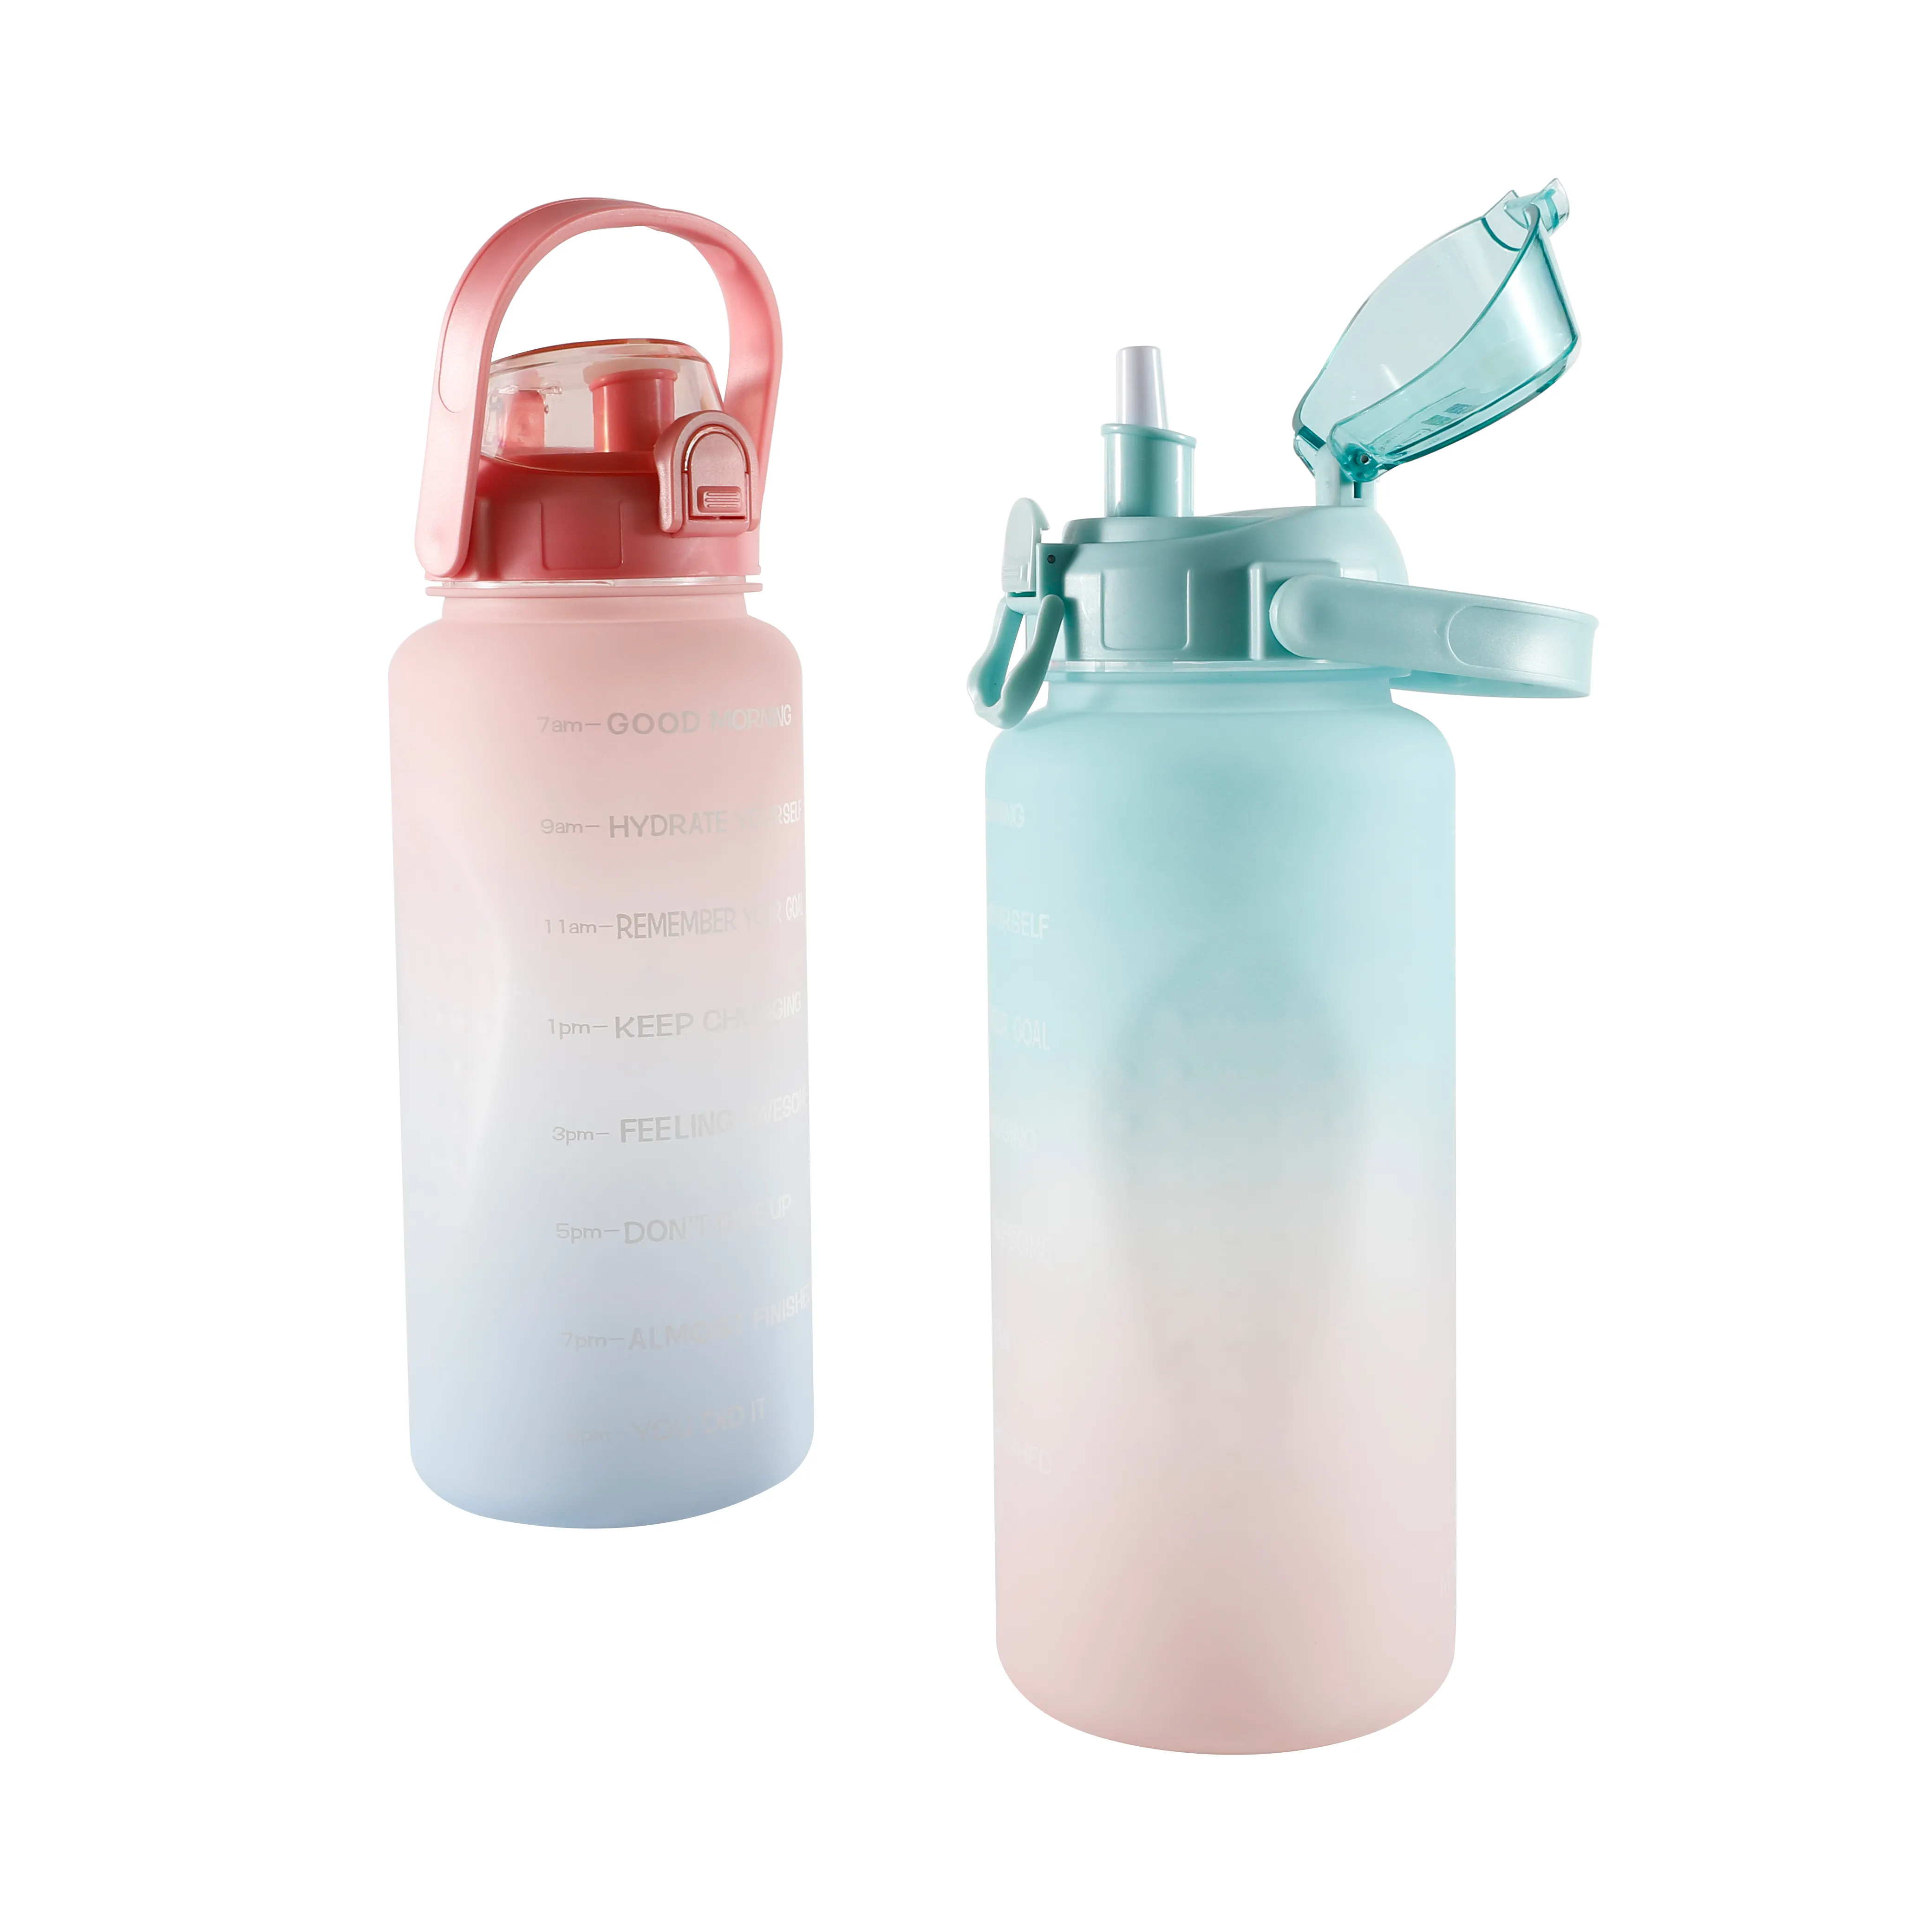 64oz Water Bottles with Times to Drink  2 in 1 Lids  Chug and Straw  Leakproof BPA Free Sports Motivational Water Bottle